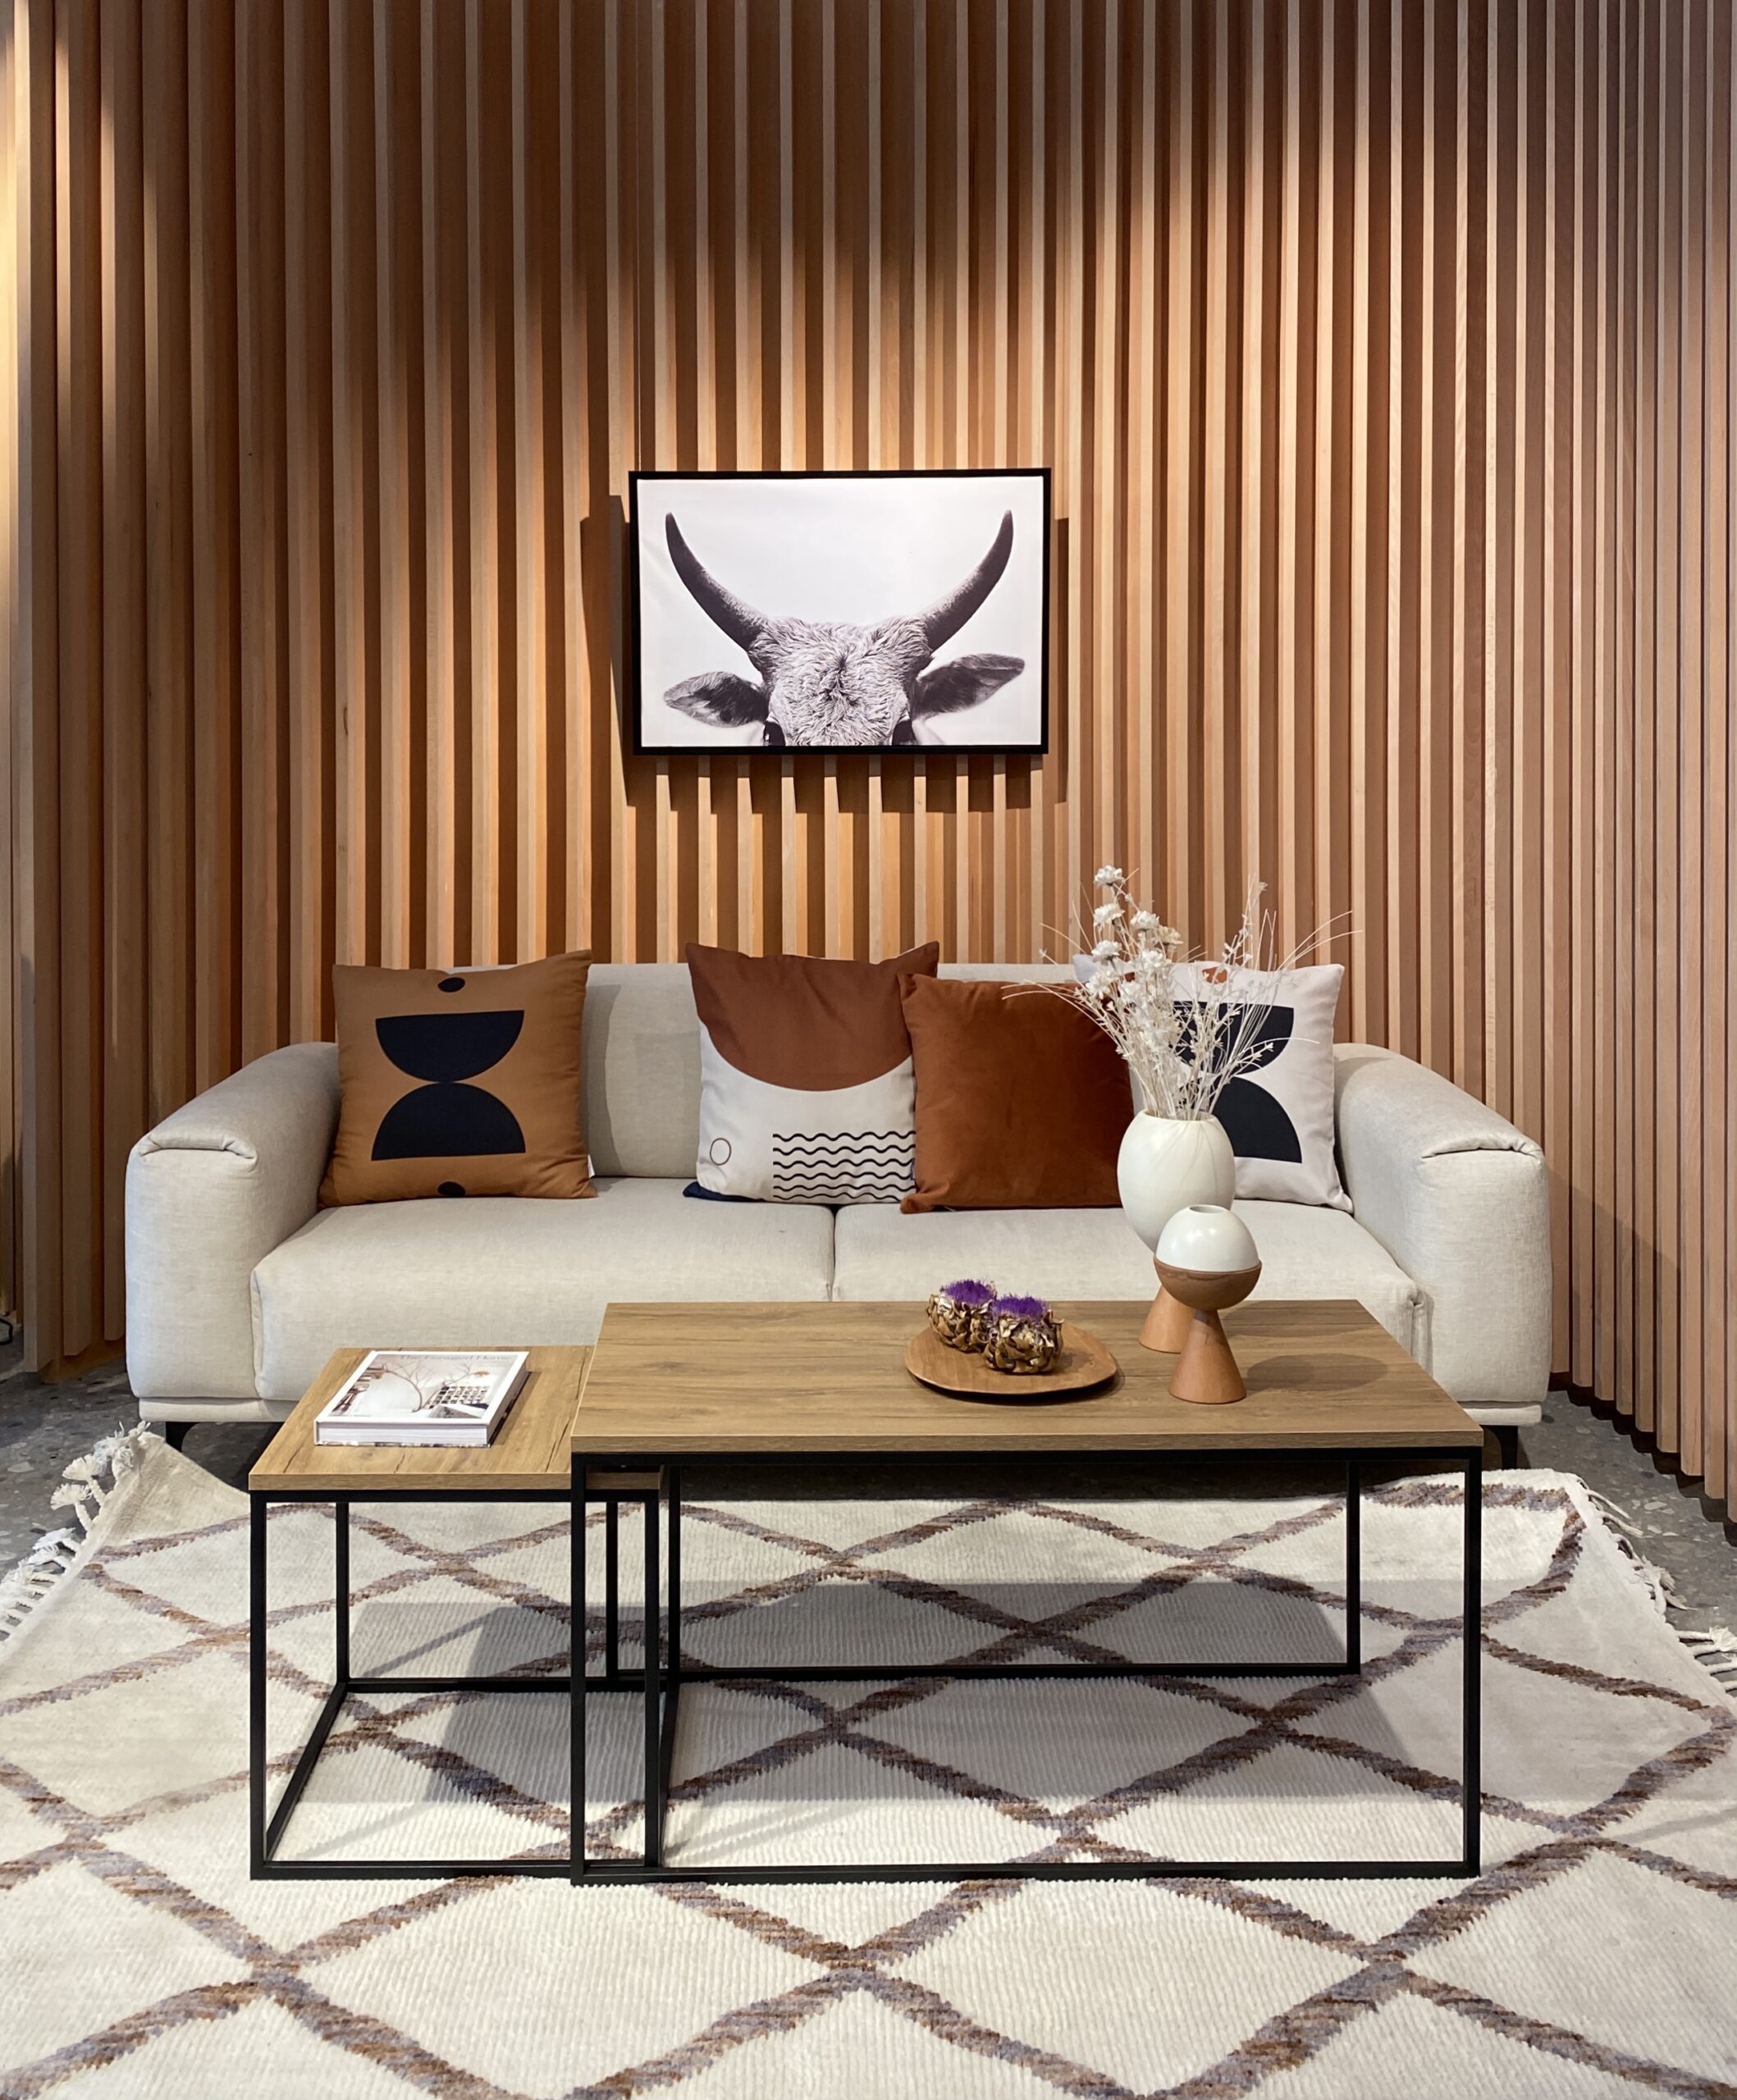 Curved fluted panelled wooden walls, cream modern sofa, black frame and wooden coffee tables, Berber style rug from vivense